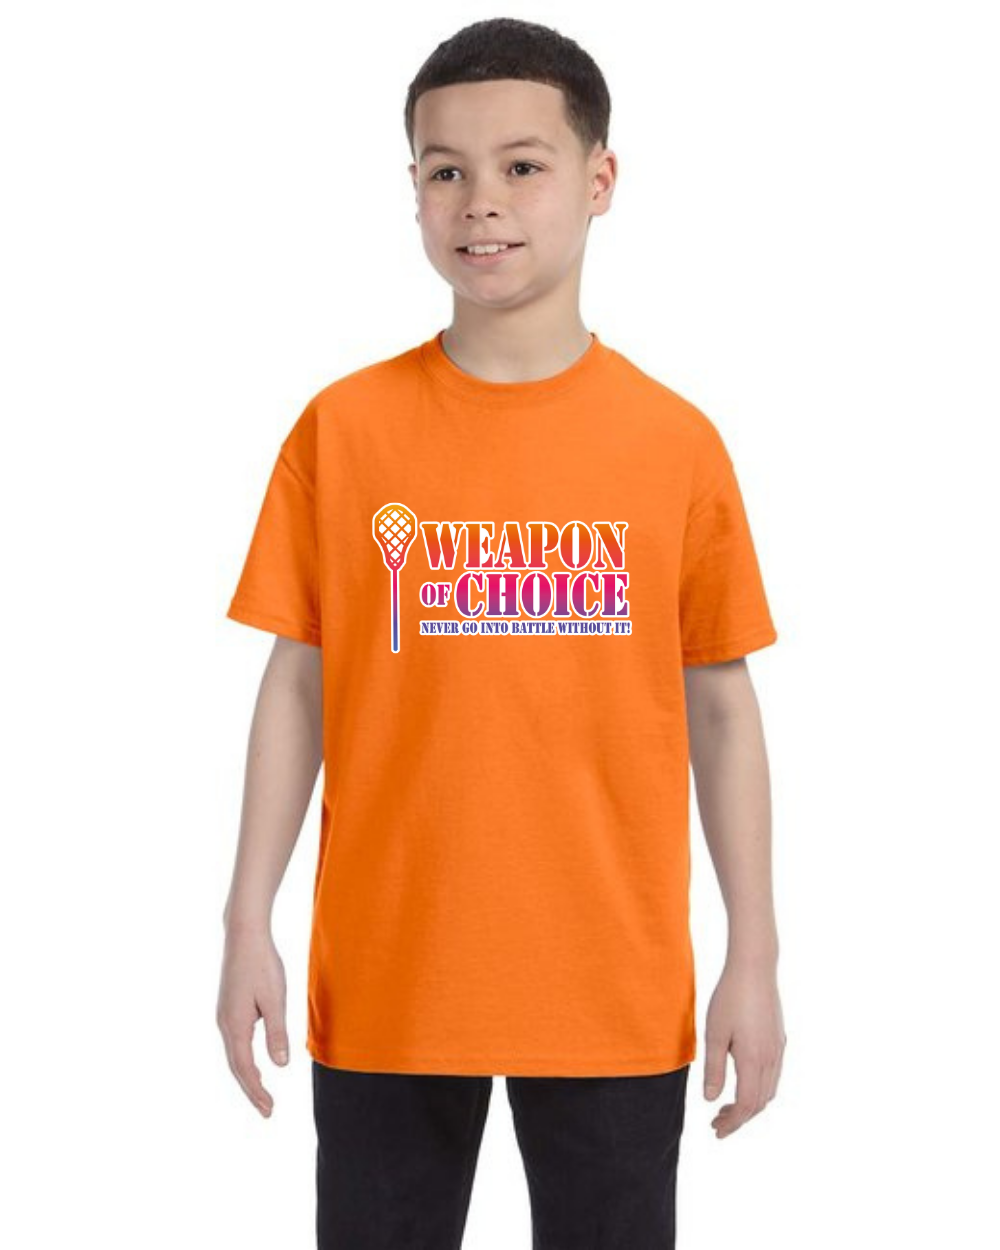 Weapon Of Choice Never Go Into Battle Without It! - Short Sleeve